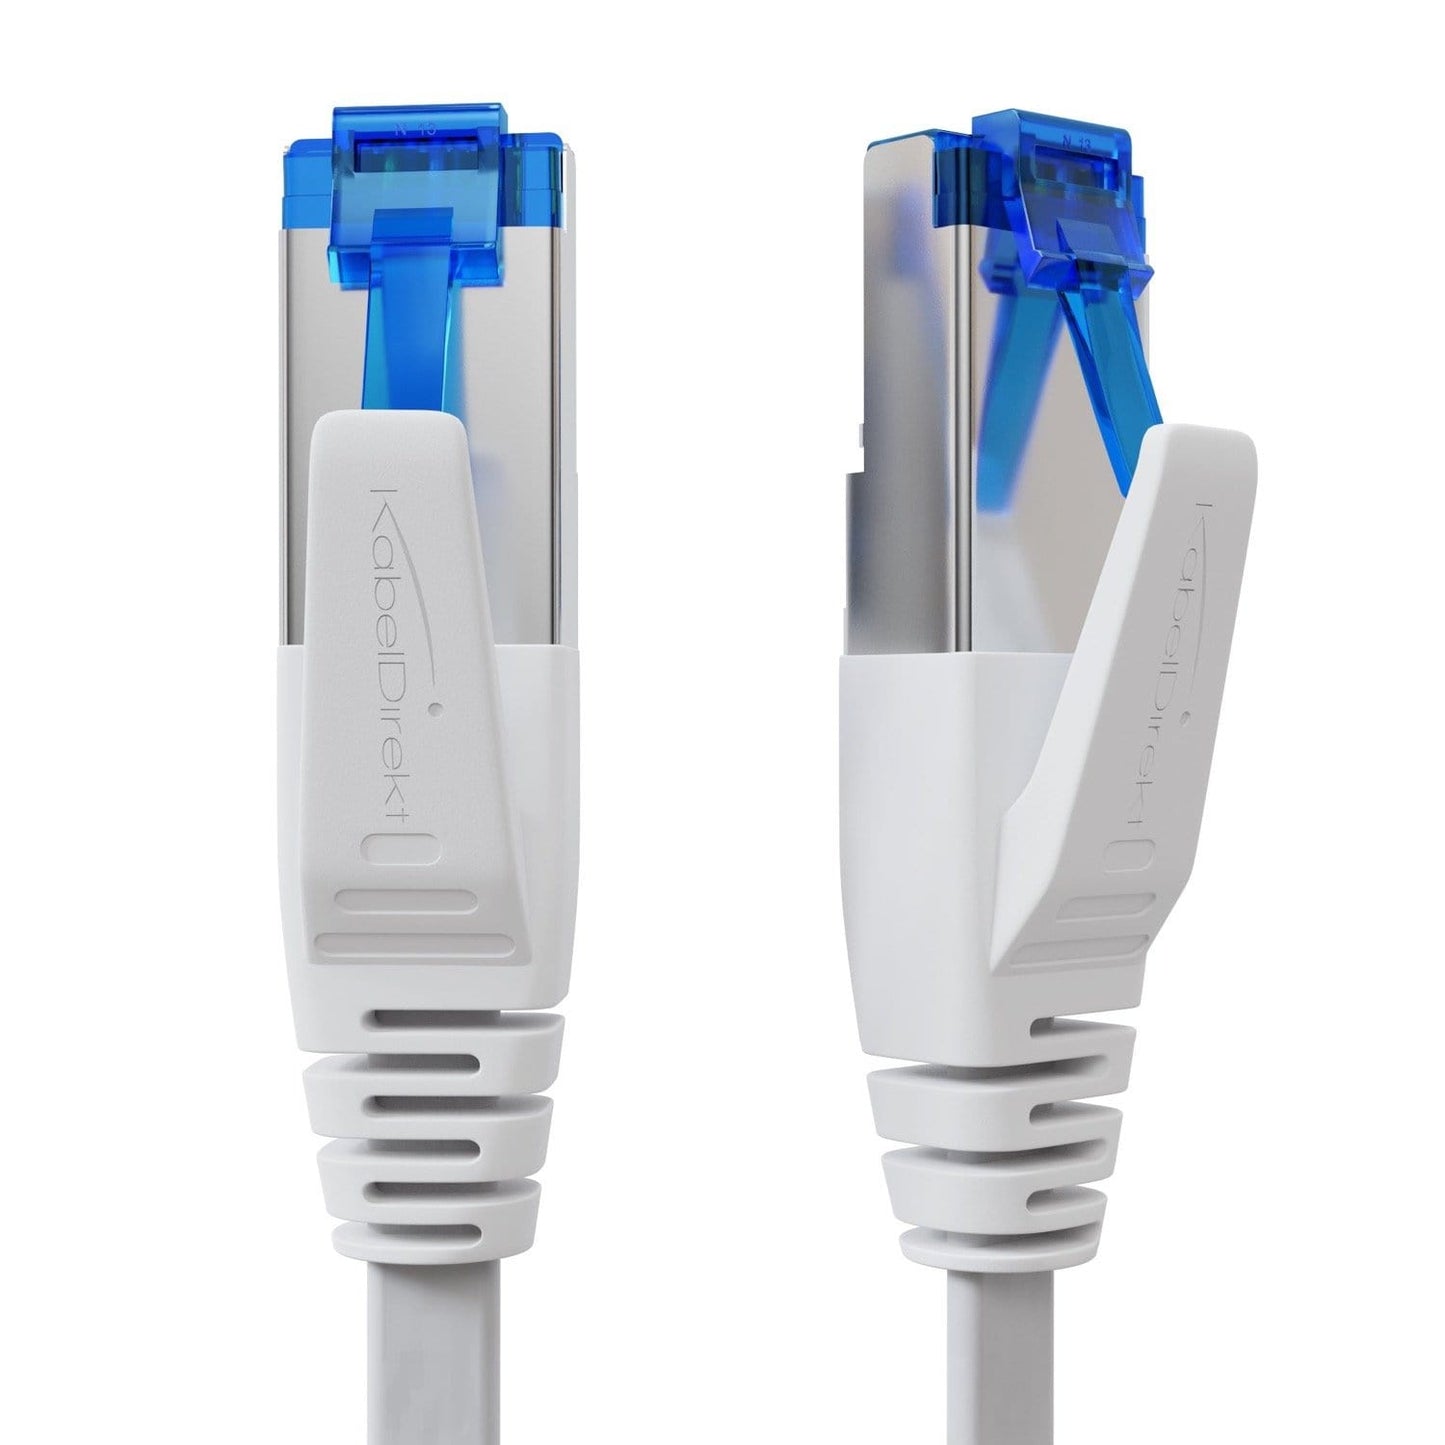 CAT7 flat Ethernet/LAN/network cable for 10 gbps - white